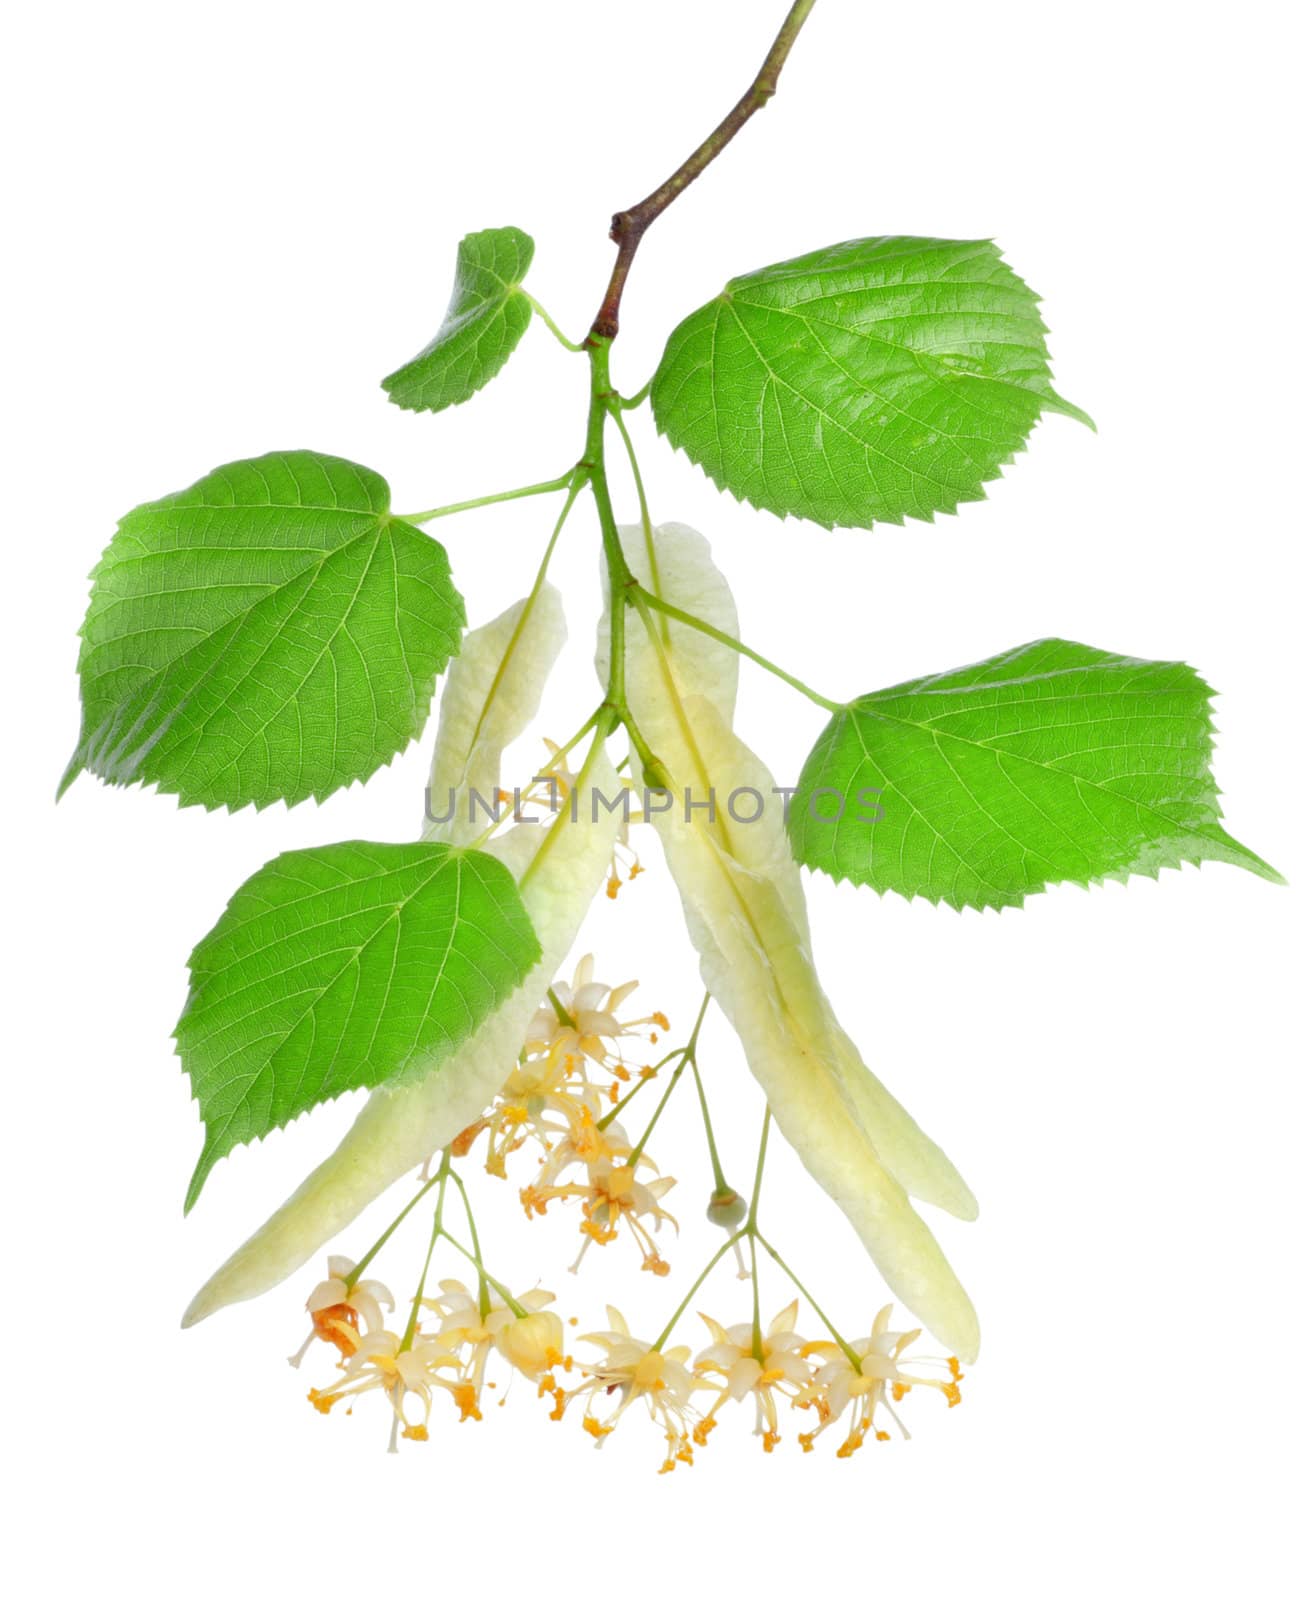 Flowers of linden-tree on a white background